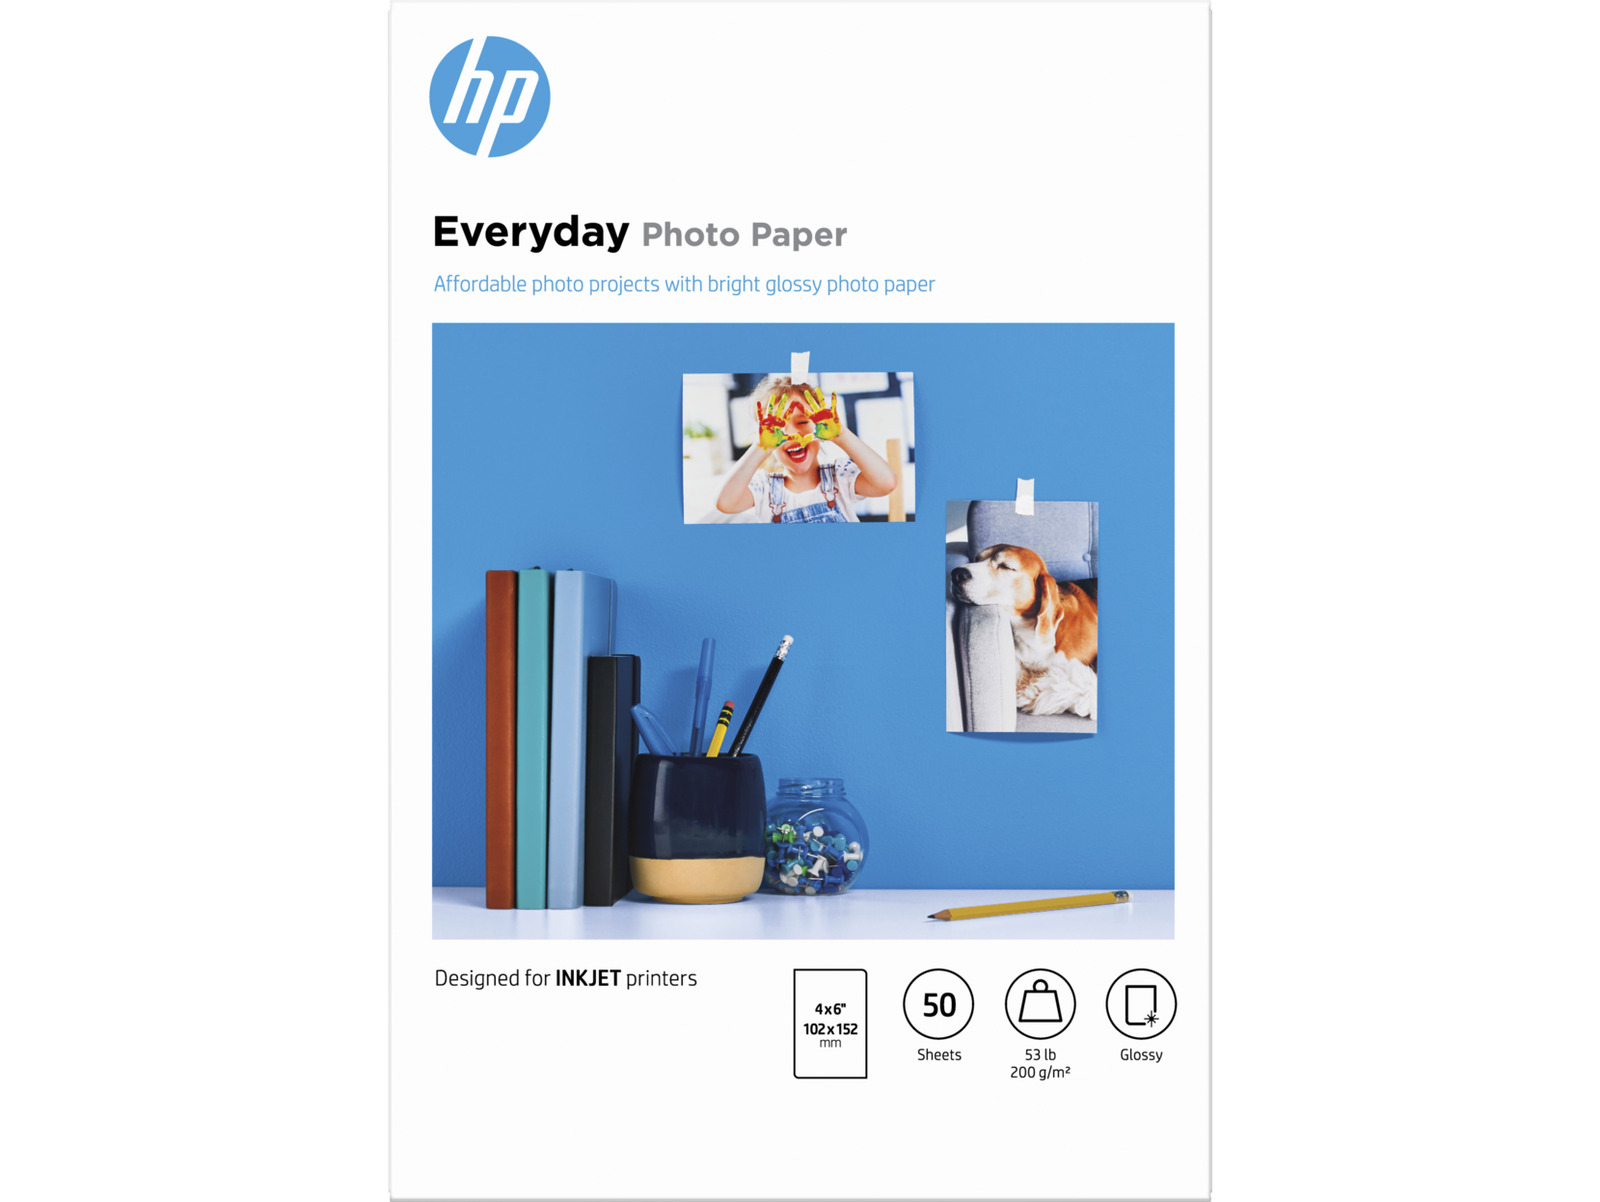 HP Everyday Photo Paper, Glossy, 52 lb, 4 x 6 in. (101 x 152 mm), 50 sheets